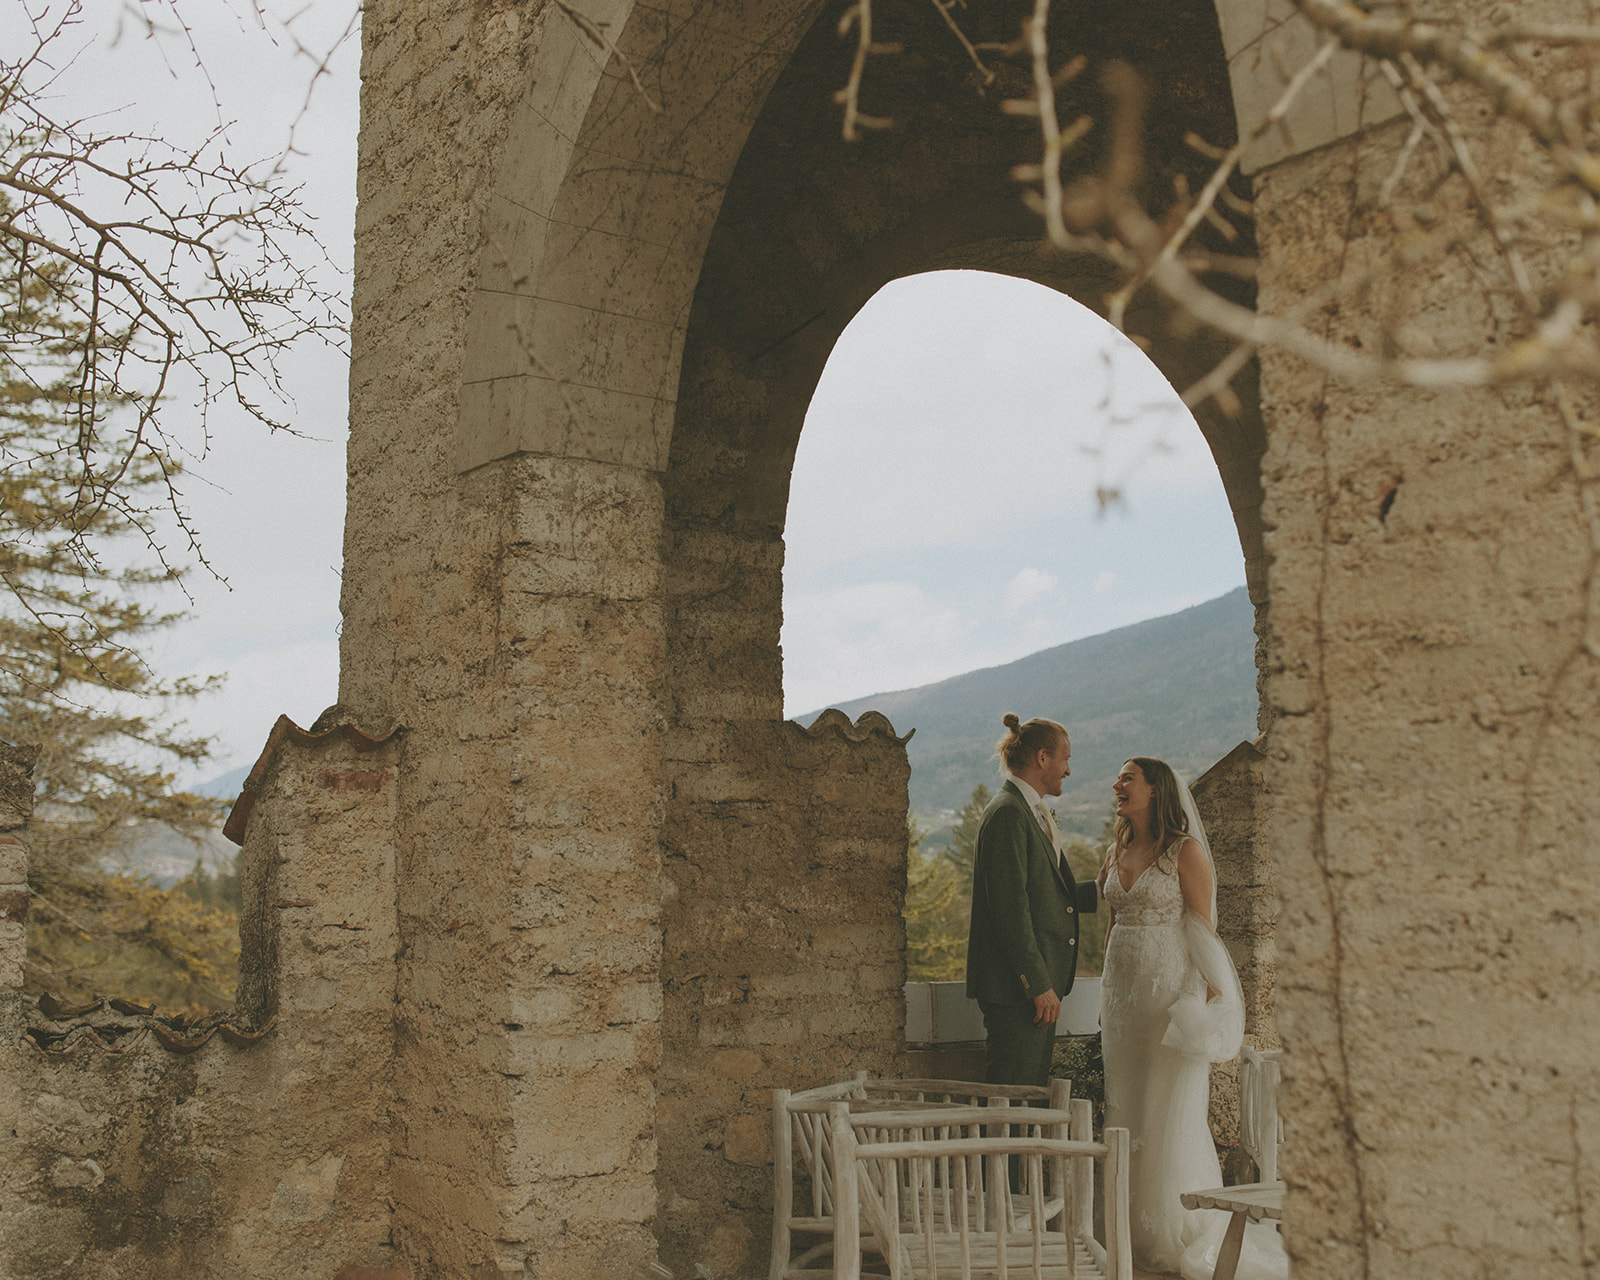 The Ultimate Guide to the Best Photo Spots for Destination Weddings